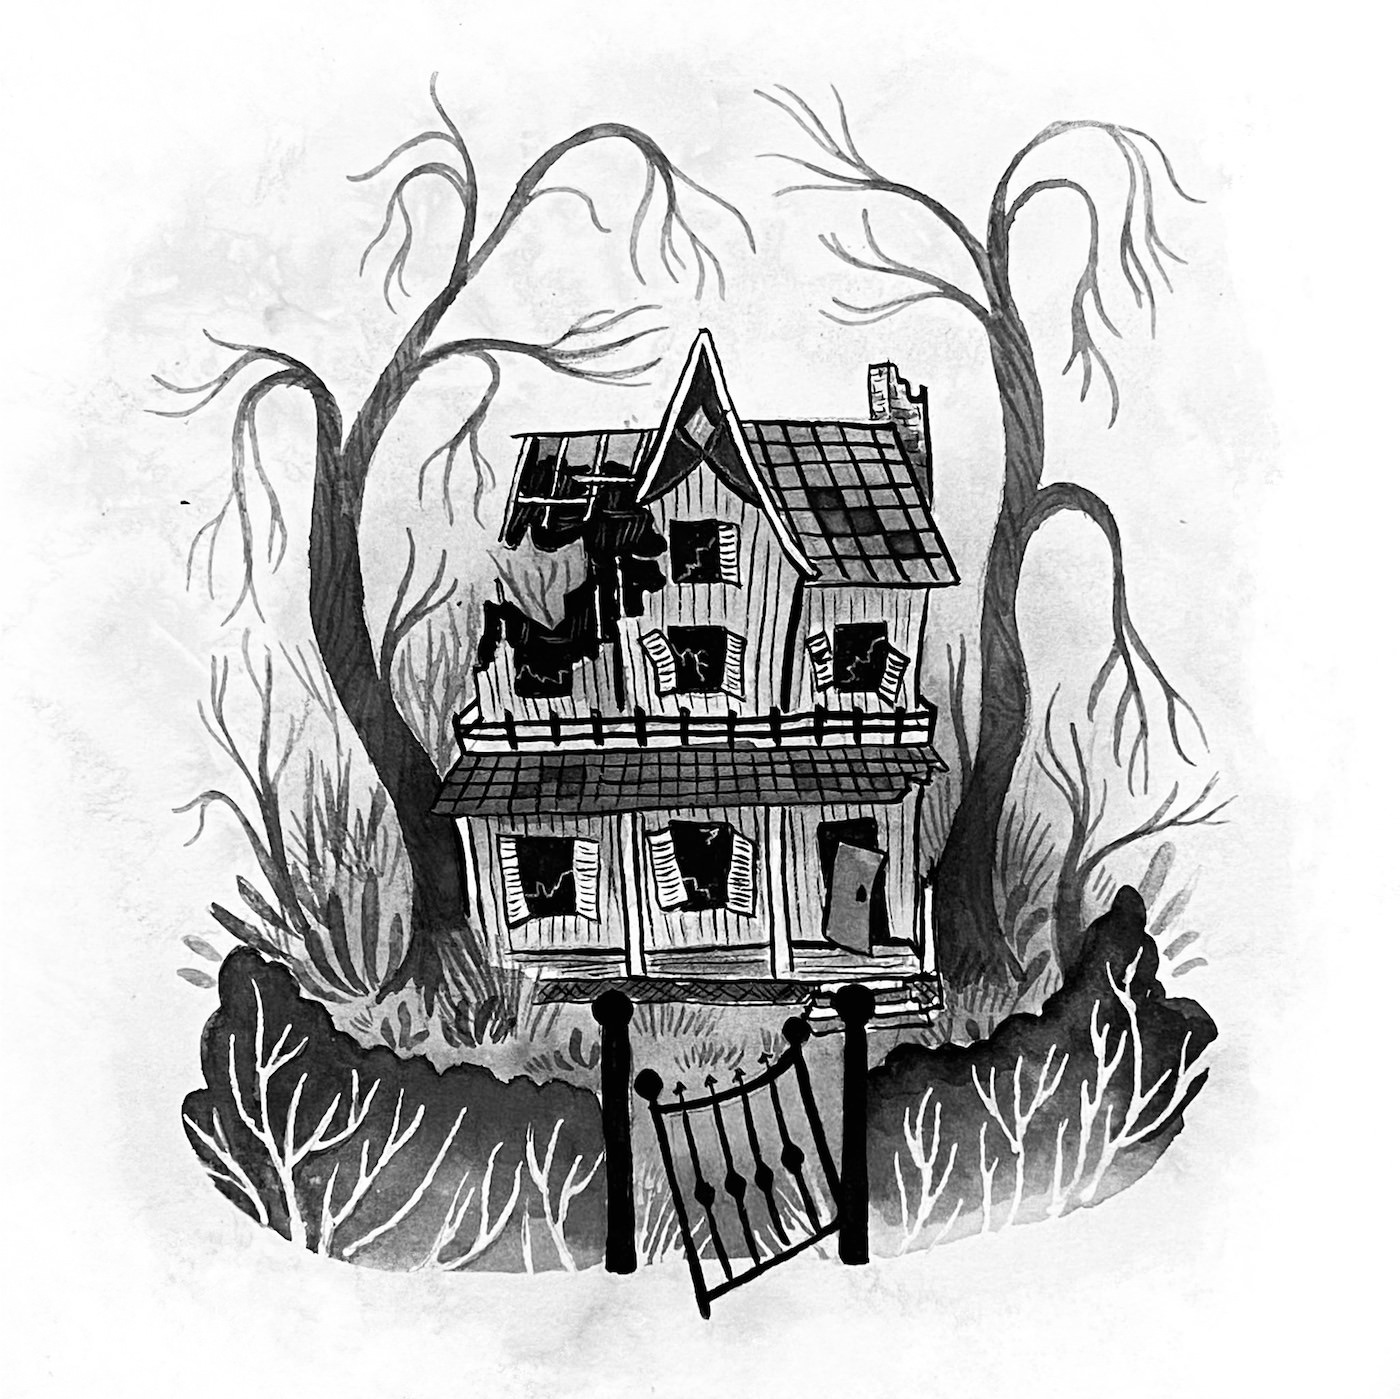 Black and white ink spot illustration by Kirsten McGonigal showing an old, empty, 2 story house with shutters falling off, broken windows, and a hold in the roof. There is a crooked gate between 2 hedges and a scruffy tree with bare branches on either side of the house.